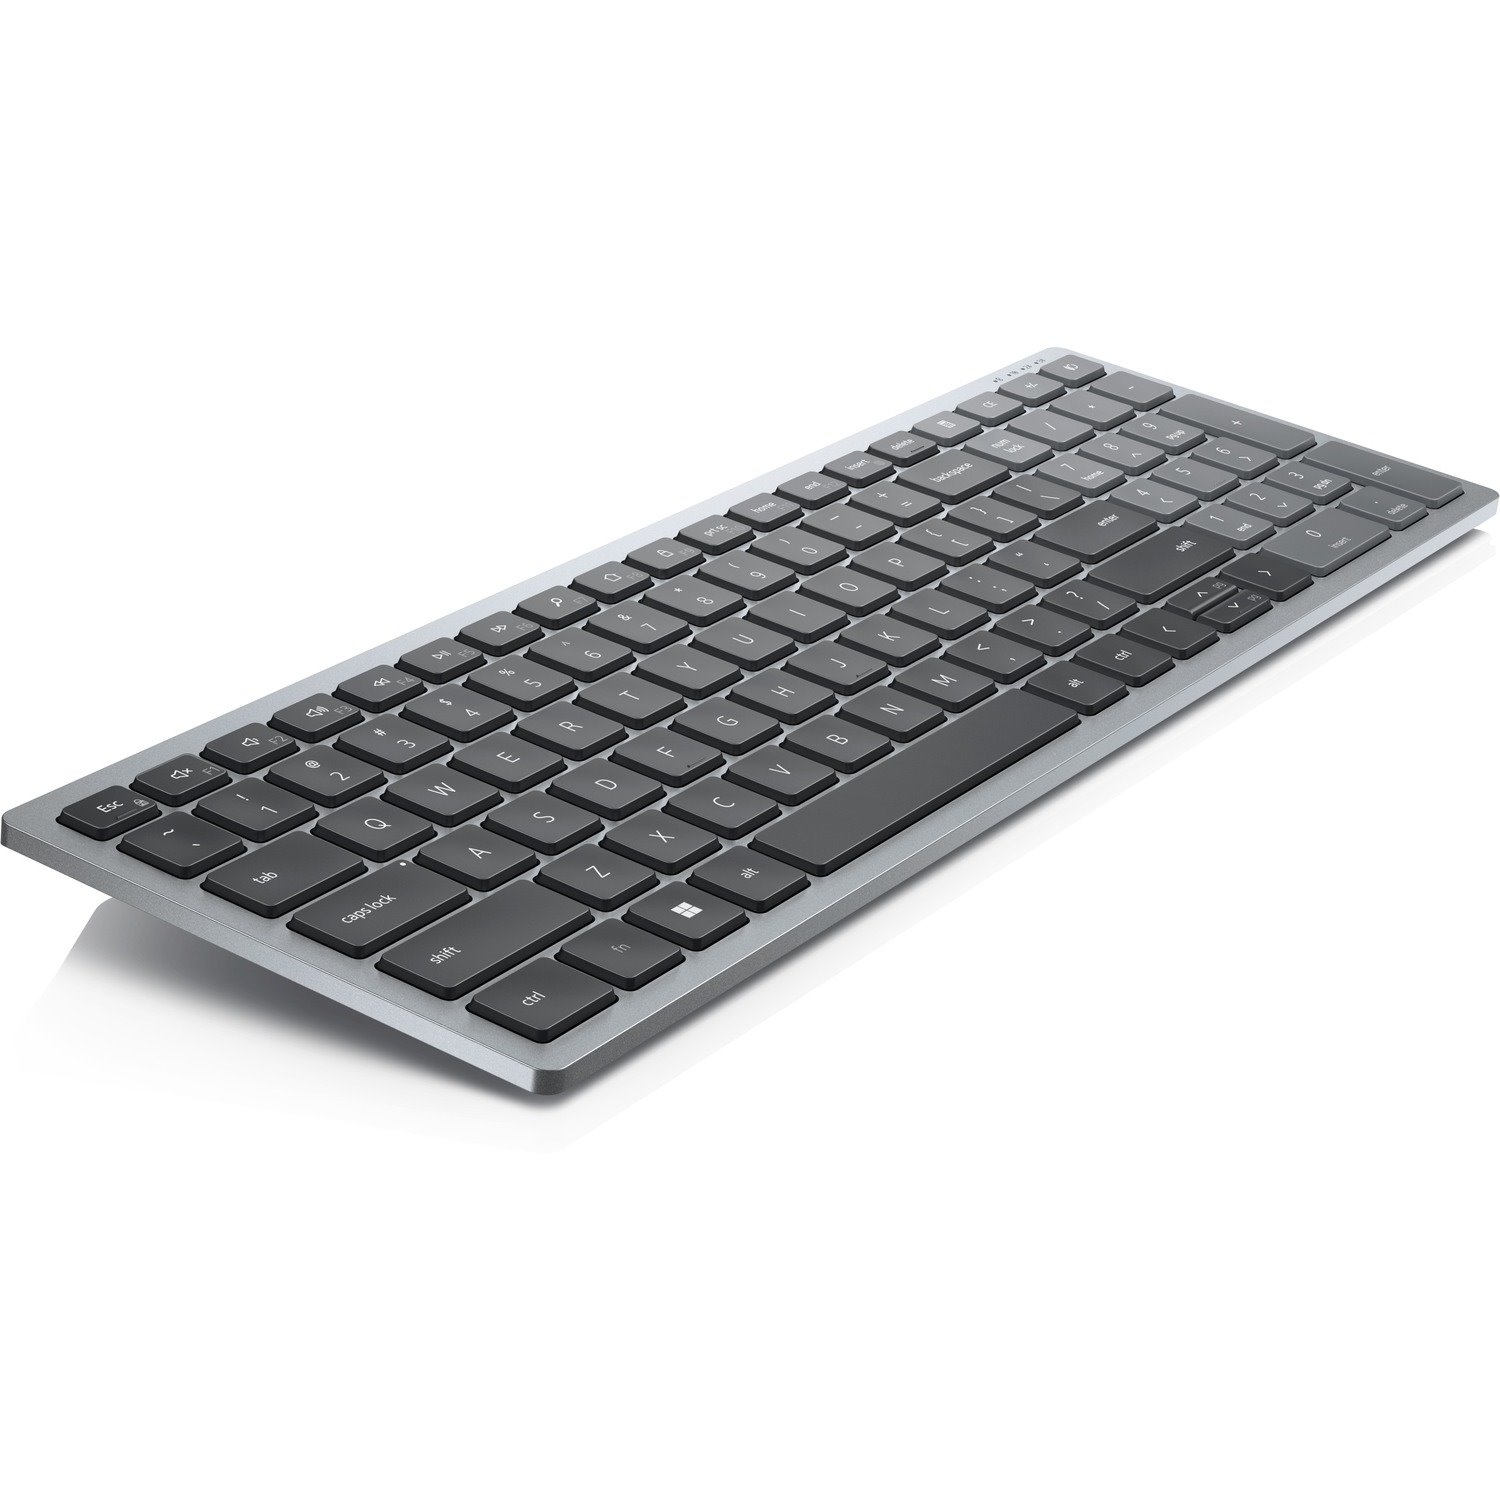 Dell Compact Multi-Device Wireless Keyboard US English - KB740 - Retail Packaging